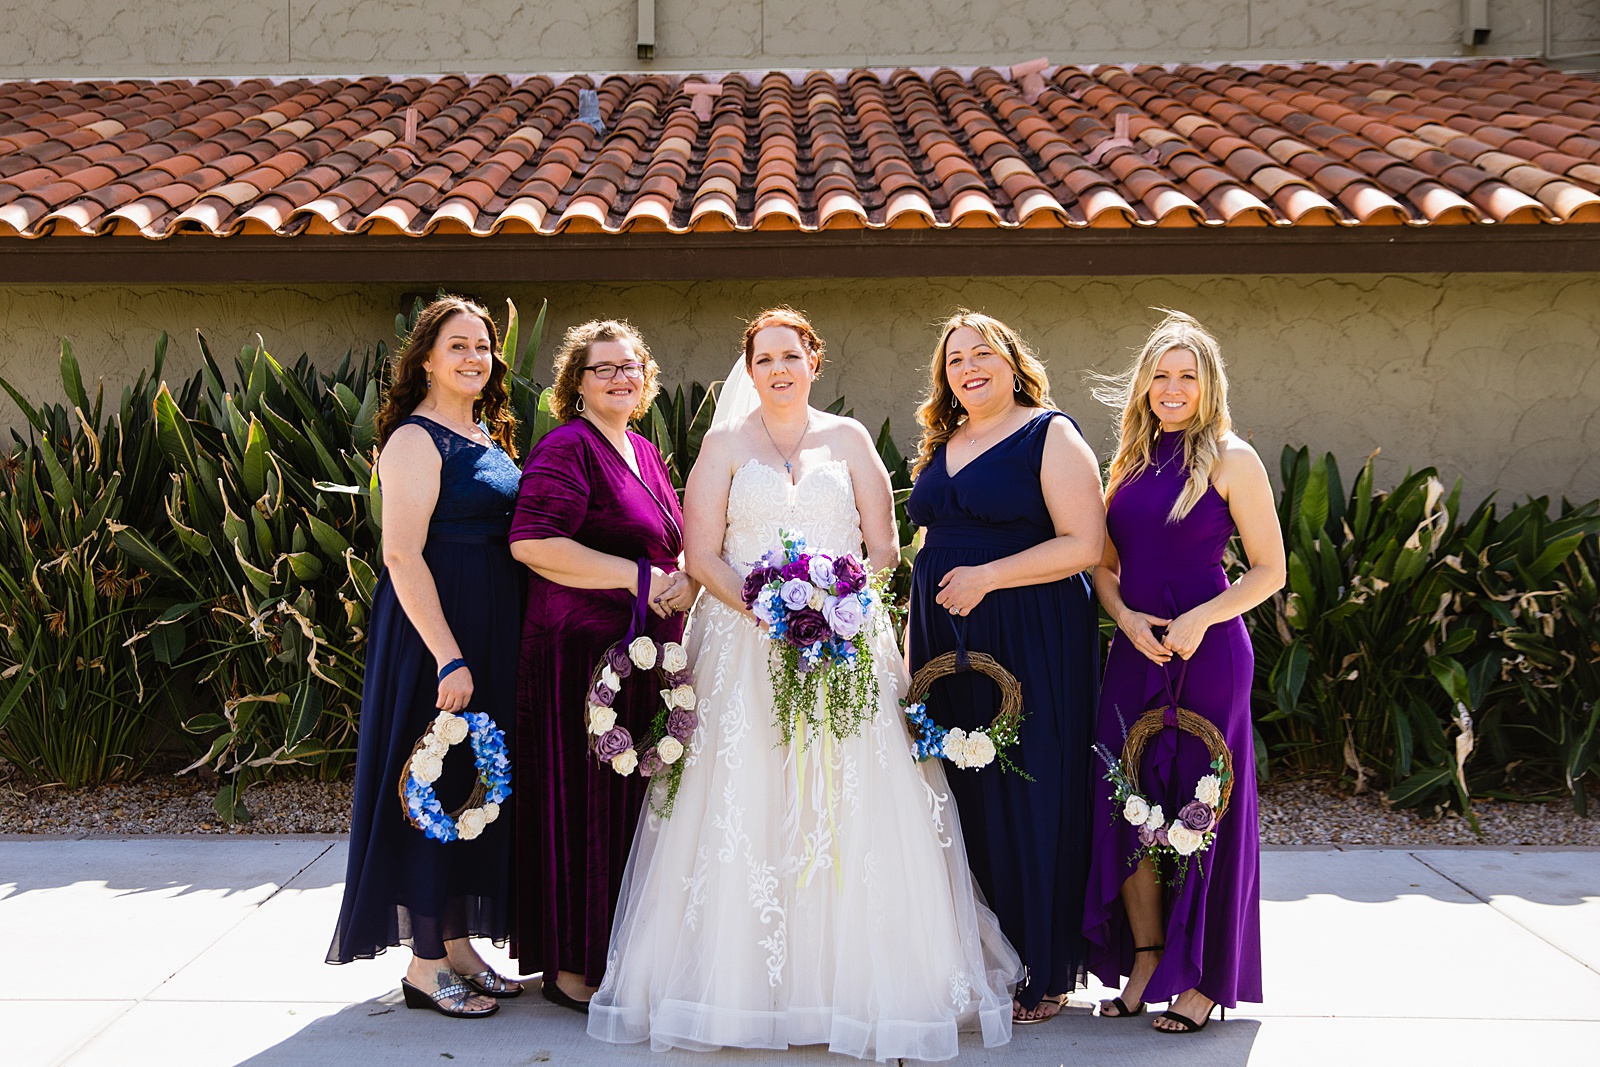 Bride and bridesmaids together at a Sun Valley Church wedding by Arizona wedding photographer PMA Photography.